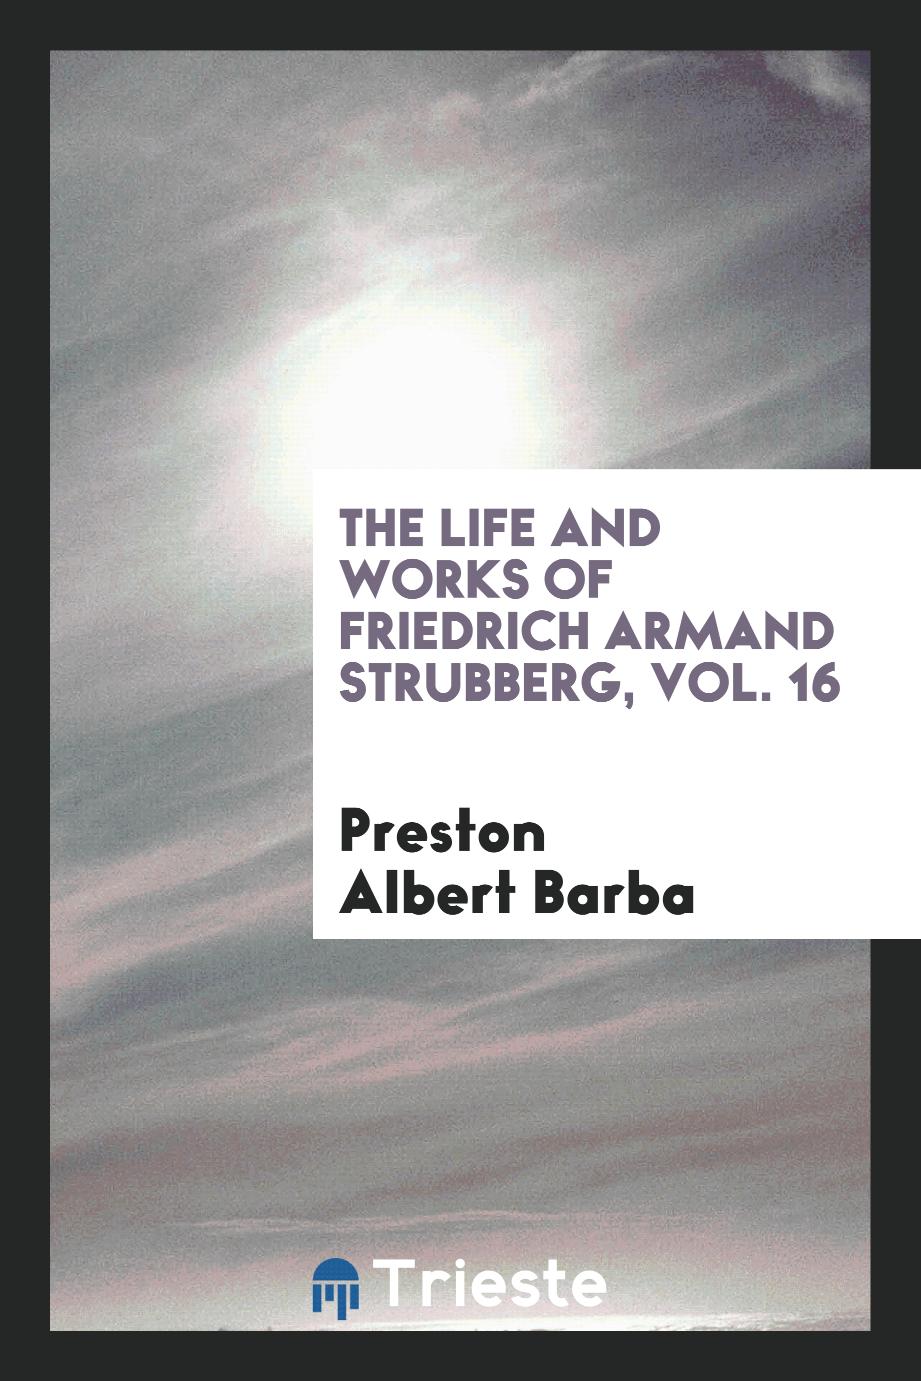 The Life and Works of Friedrich Armand Strubberg, Vol. 16